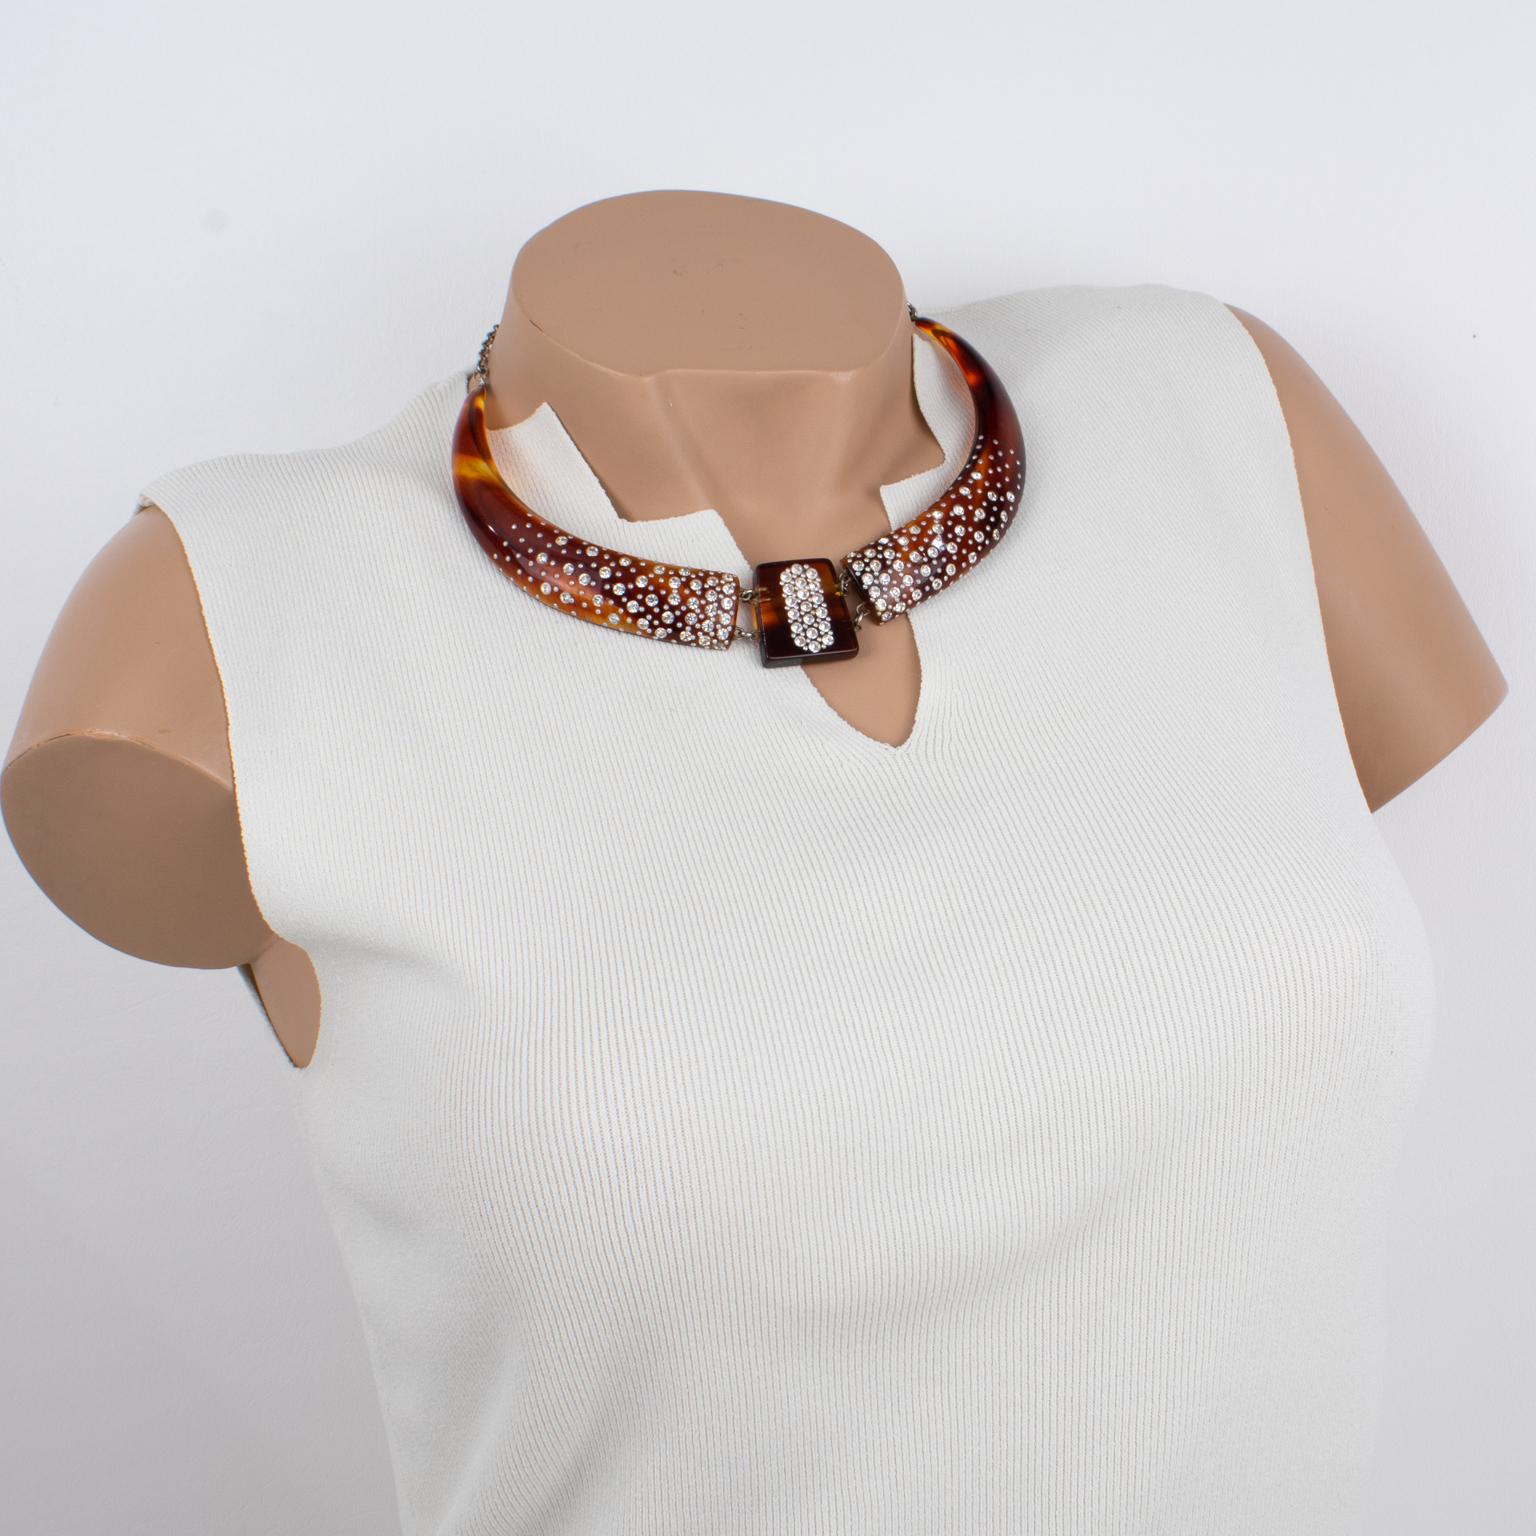 This stunning French celluloid and sparkle choker necklace dates from the 1920s. The piece boasts a faux-tortoise (tortoiseshell) color with a geometric articulated design and is embellished with crystal rhinestones and tiny silvered metal studs.